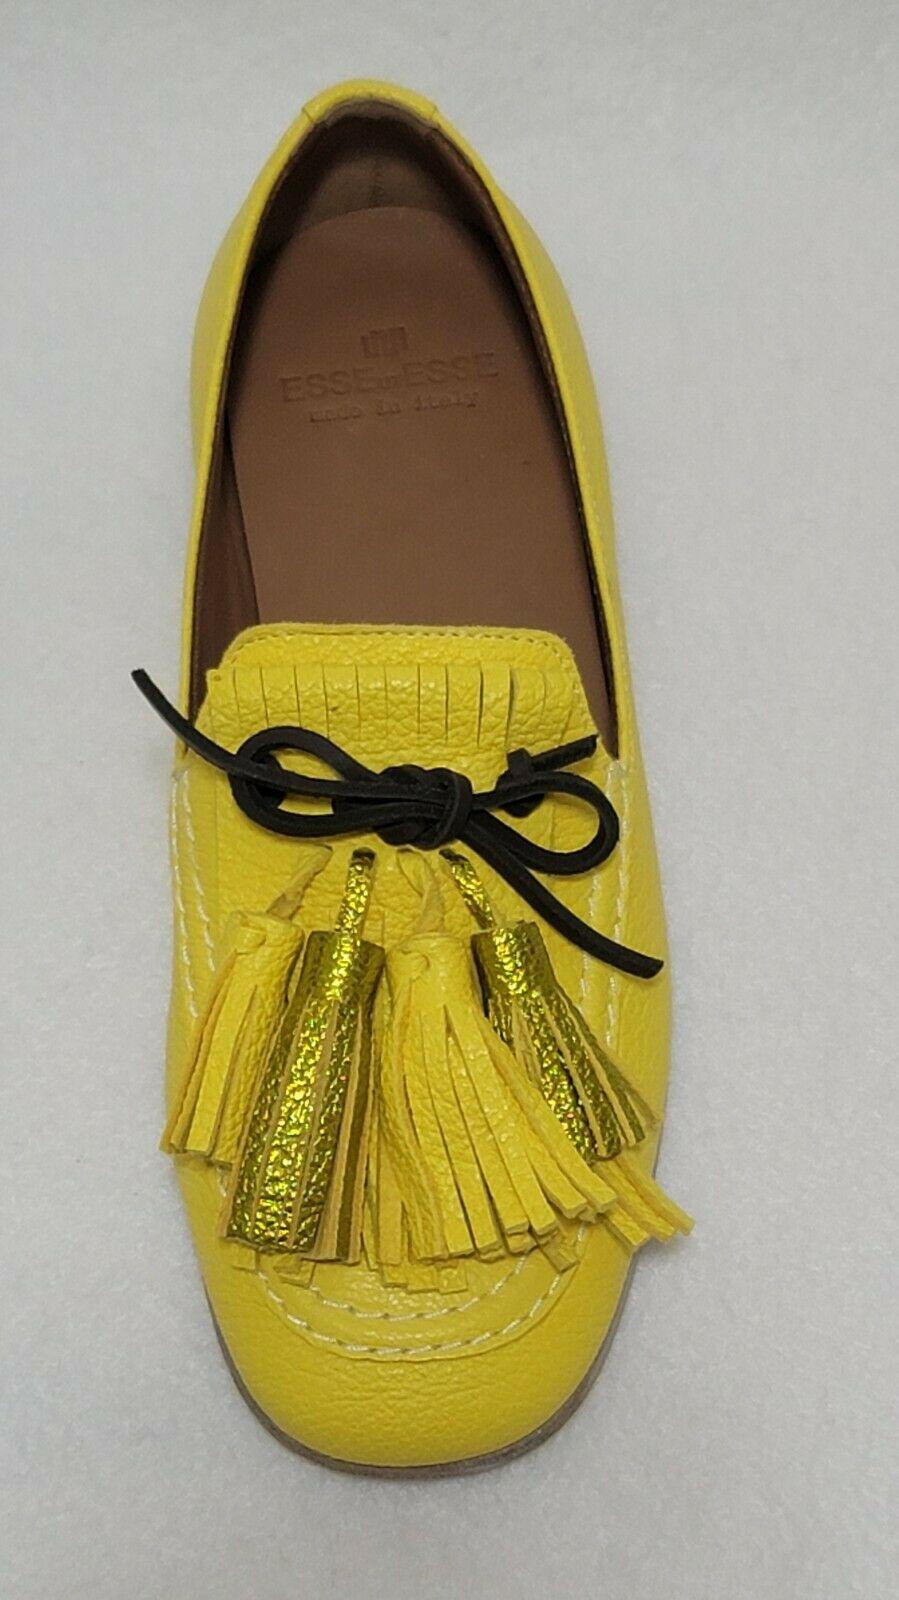 ESSE UT ESSE Women's Tassel Loafer Yllow Gold Shoes Size EU 36 US 6  Italy - SVNYFancy